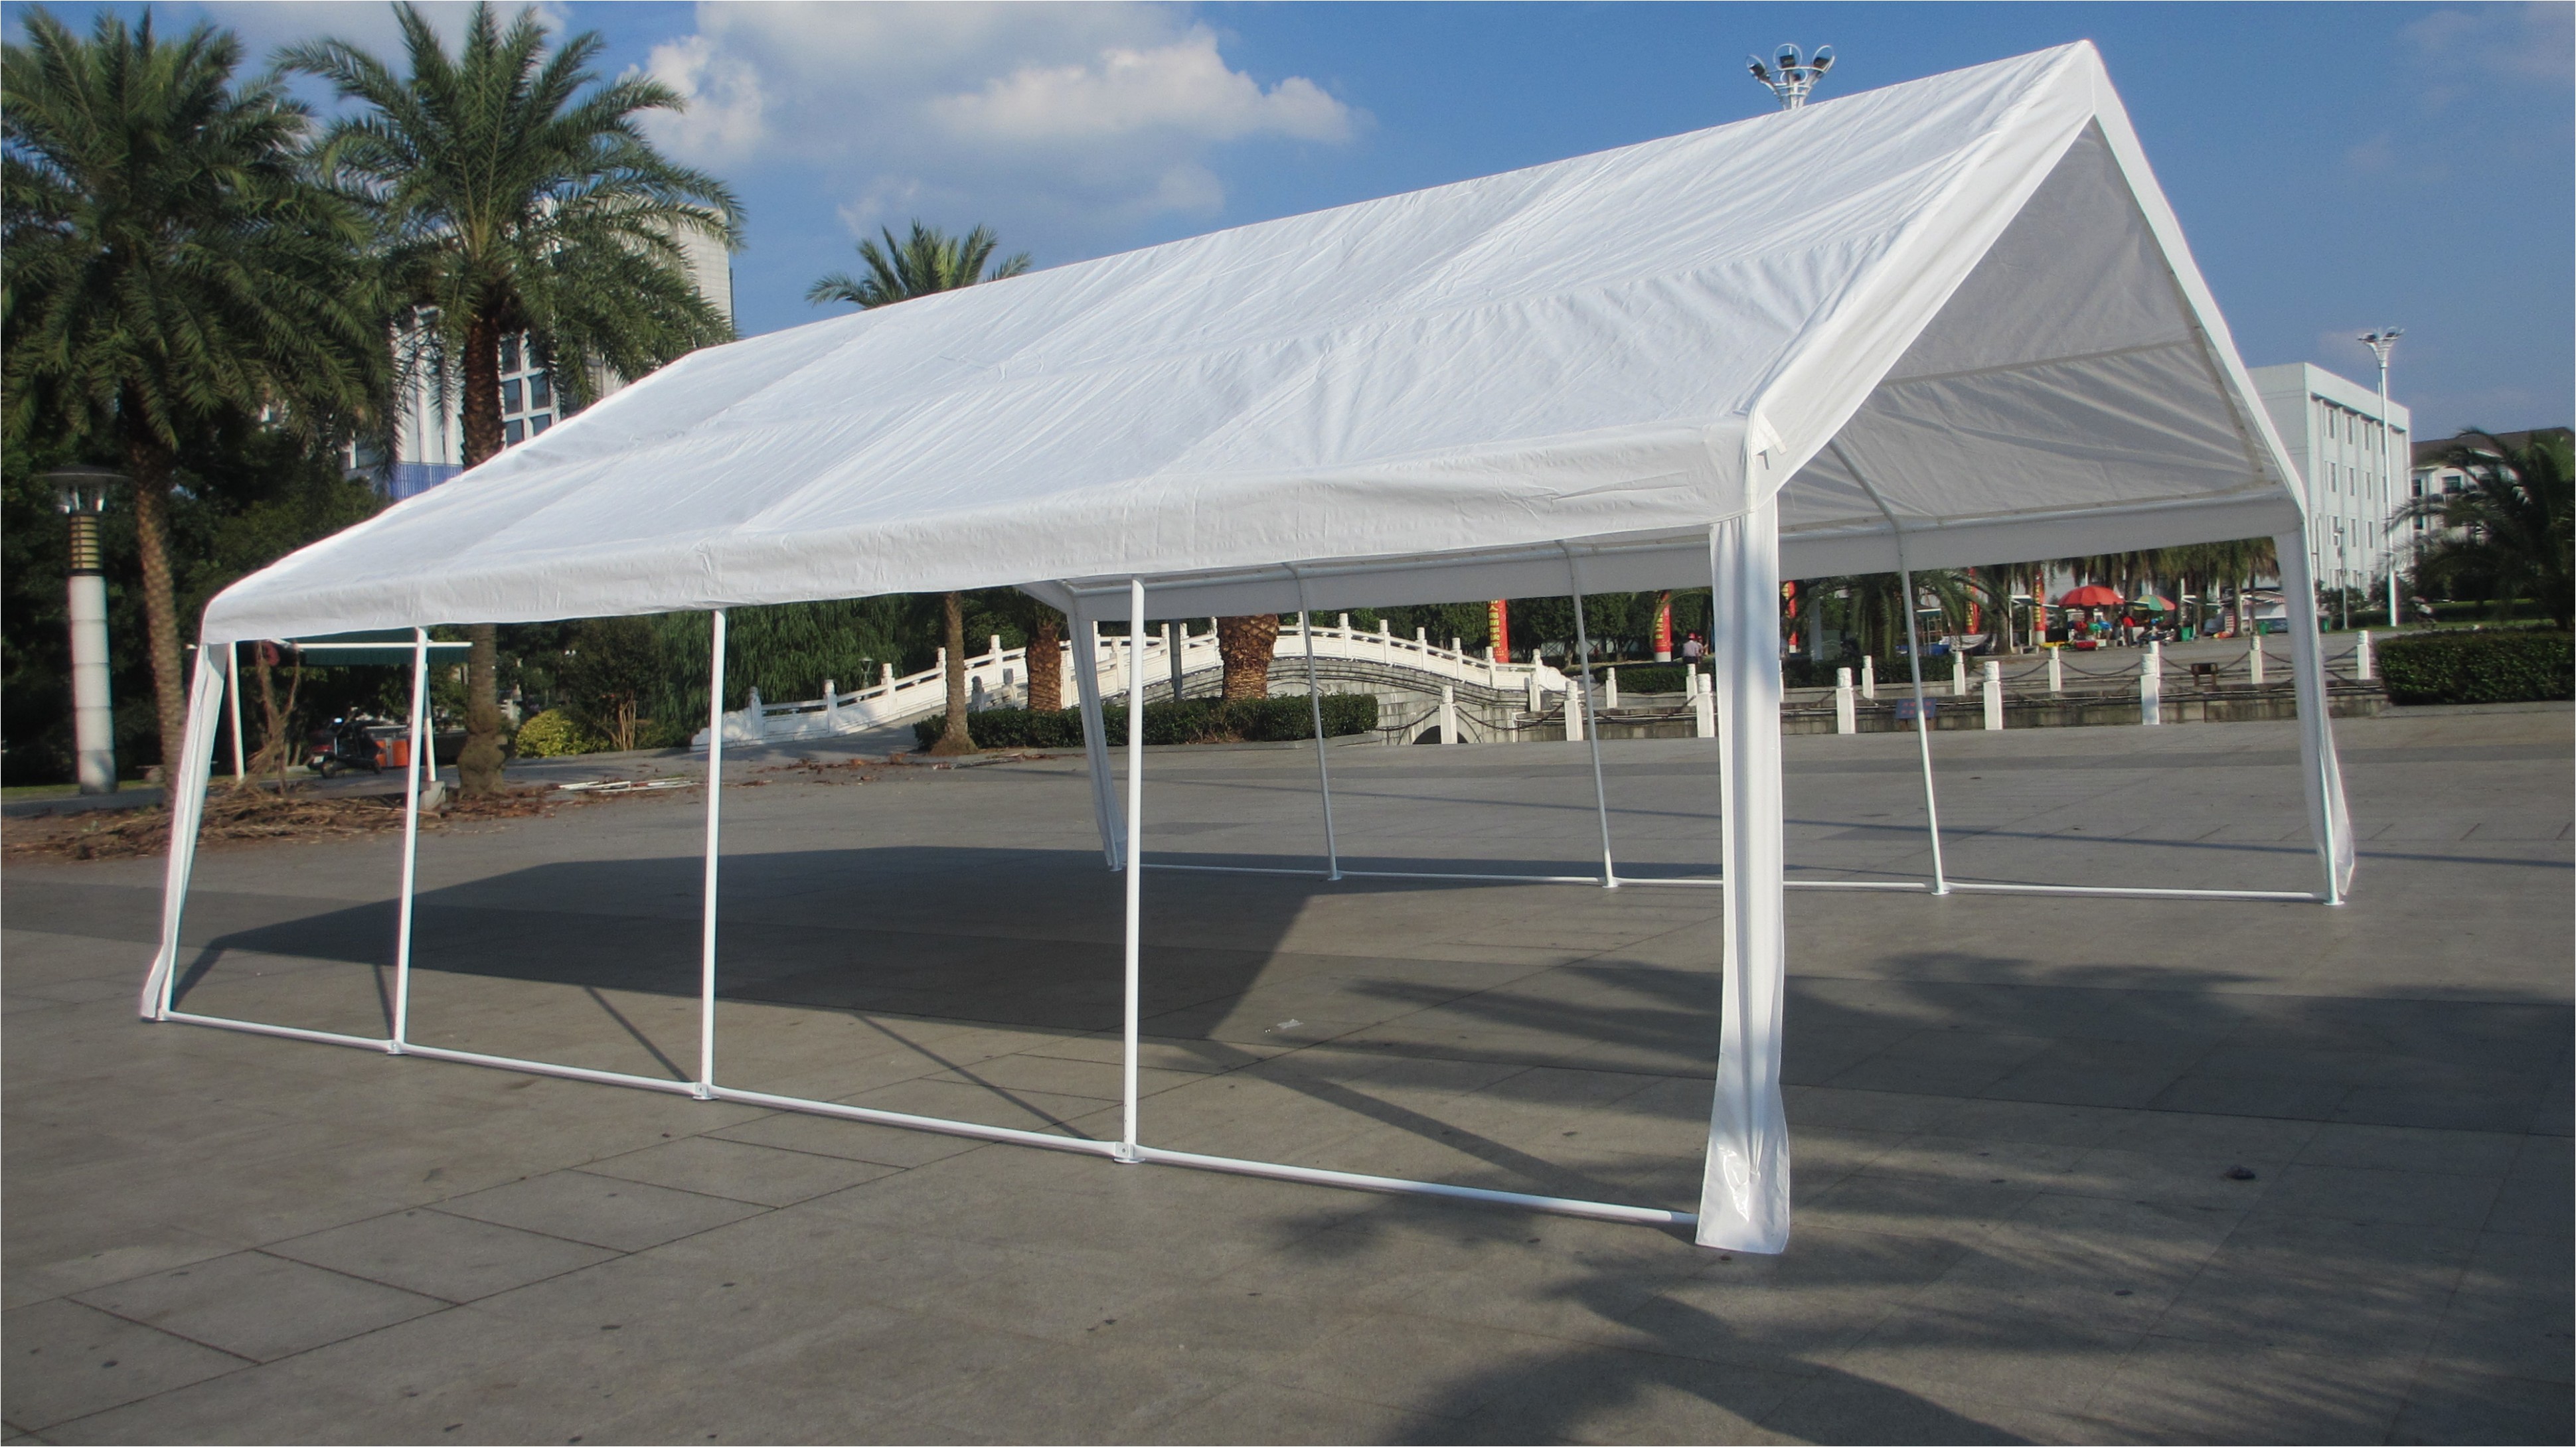 20×20 Canopy Home Depot 20×20 Tent Costco Giga Sc 1 St the Home Depot